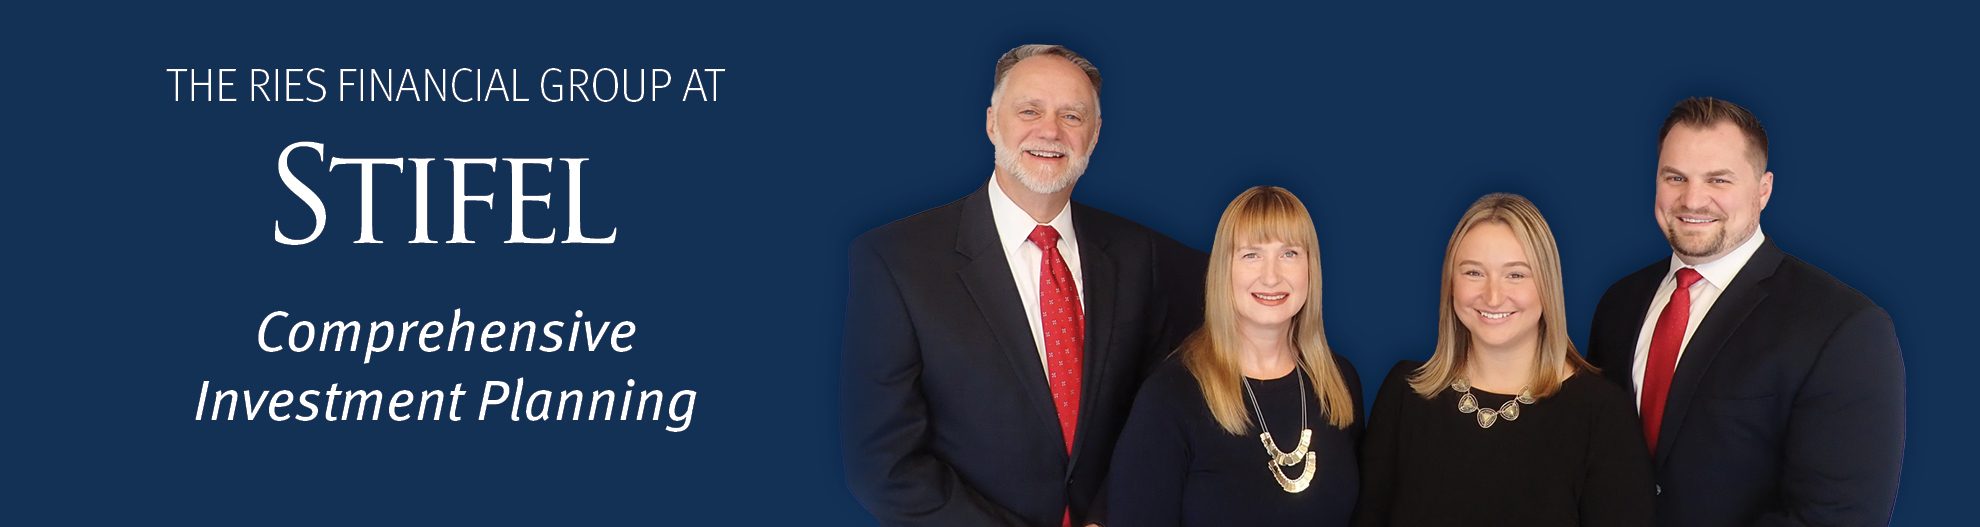 The Ries Financial Group at Stifel Comprehensive  Investment Planning; Image of The Ries Financial Group: from left to right; Joseph E. Ries, Heather Joynes, Jennifer Smith, Ryan Green